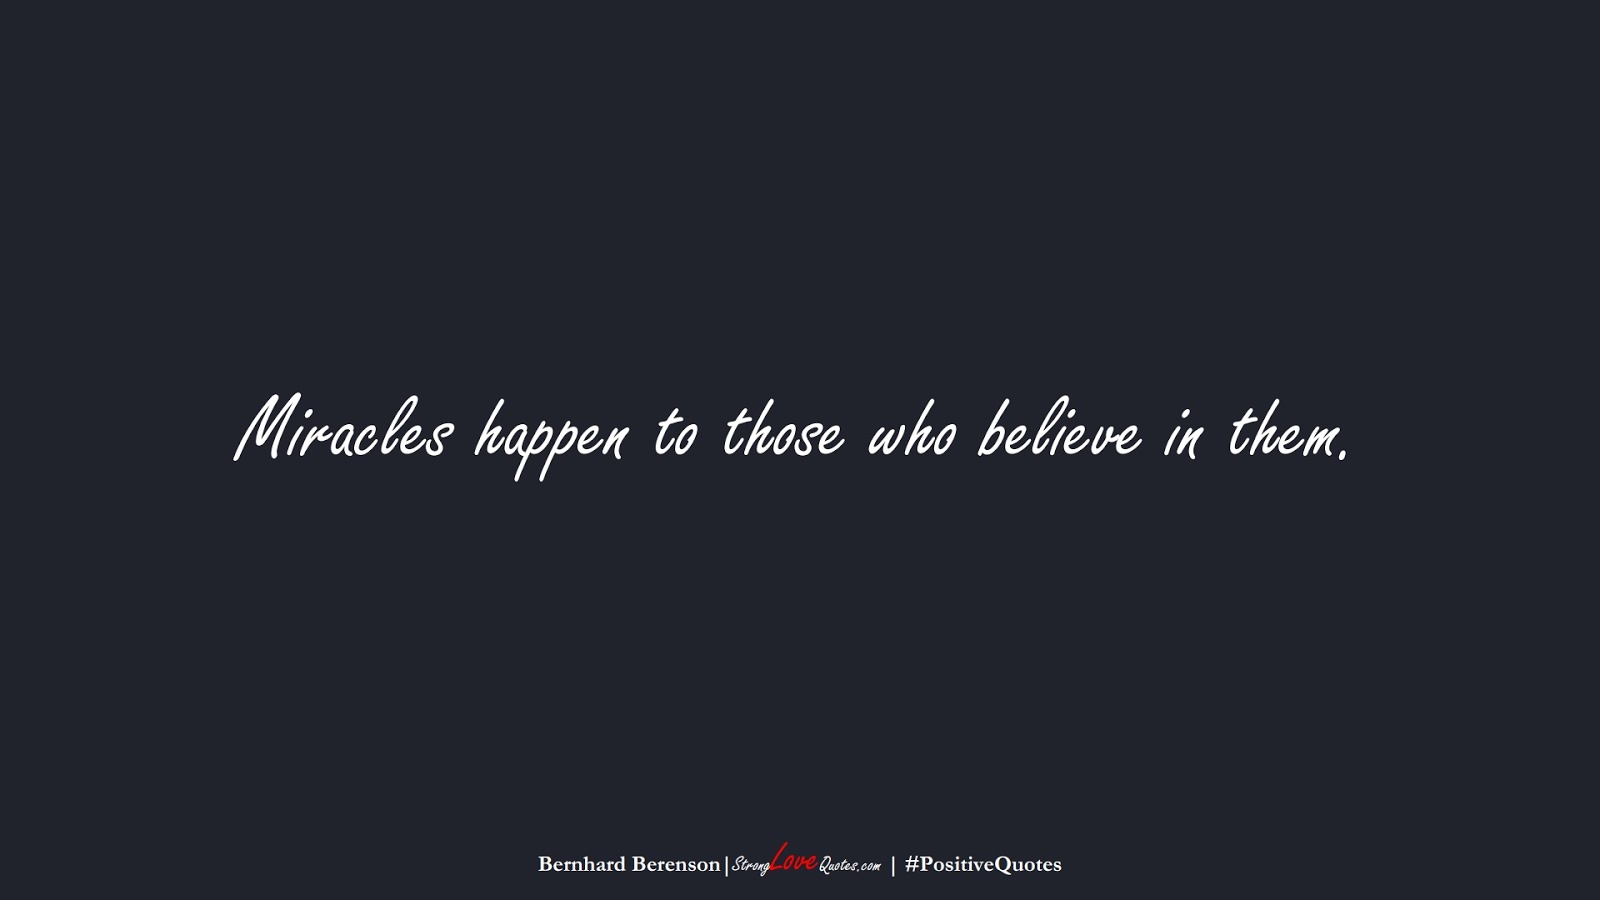 Miracles happen to those who believe in them. (Bernhard Berenson);  #PositiveQuotes